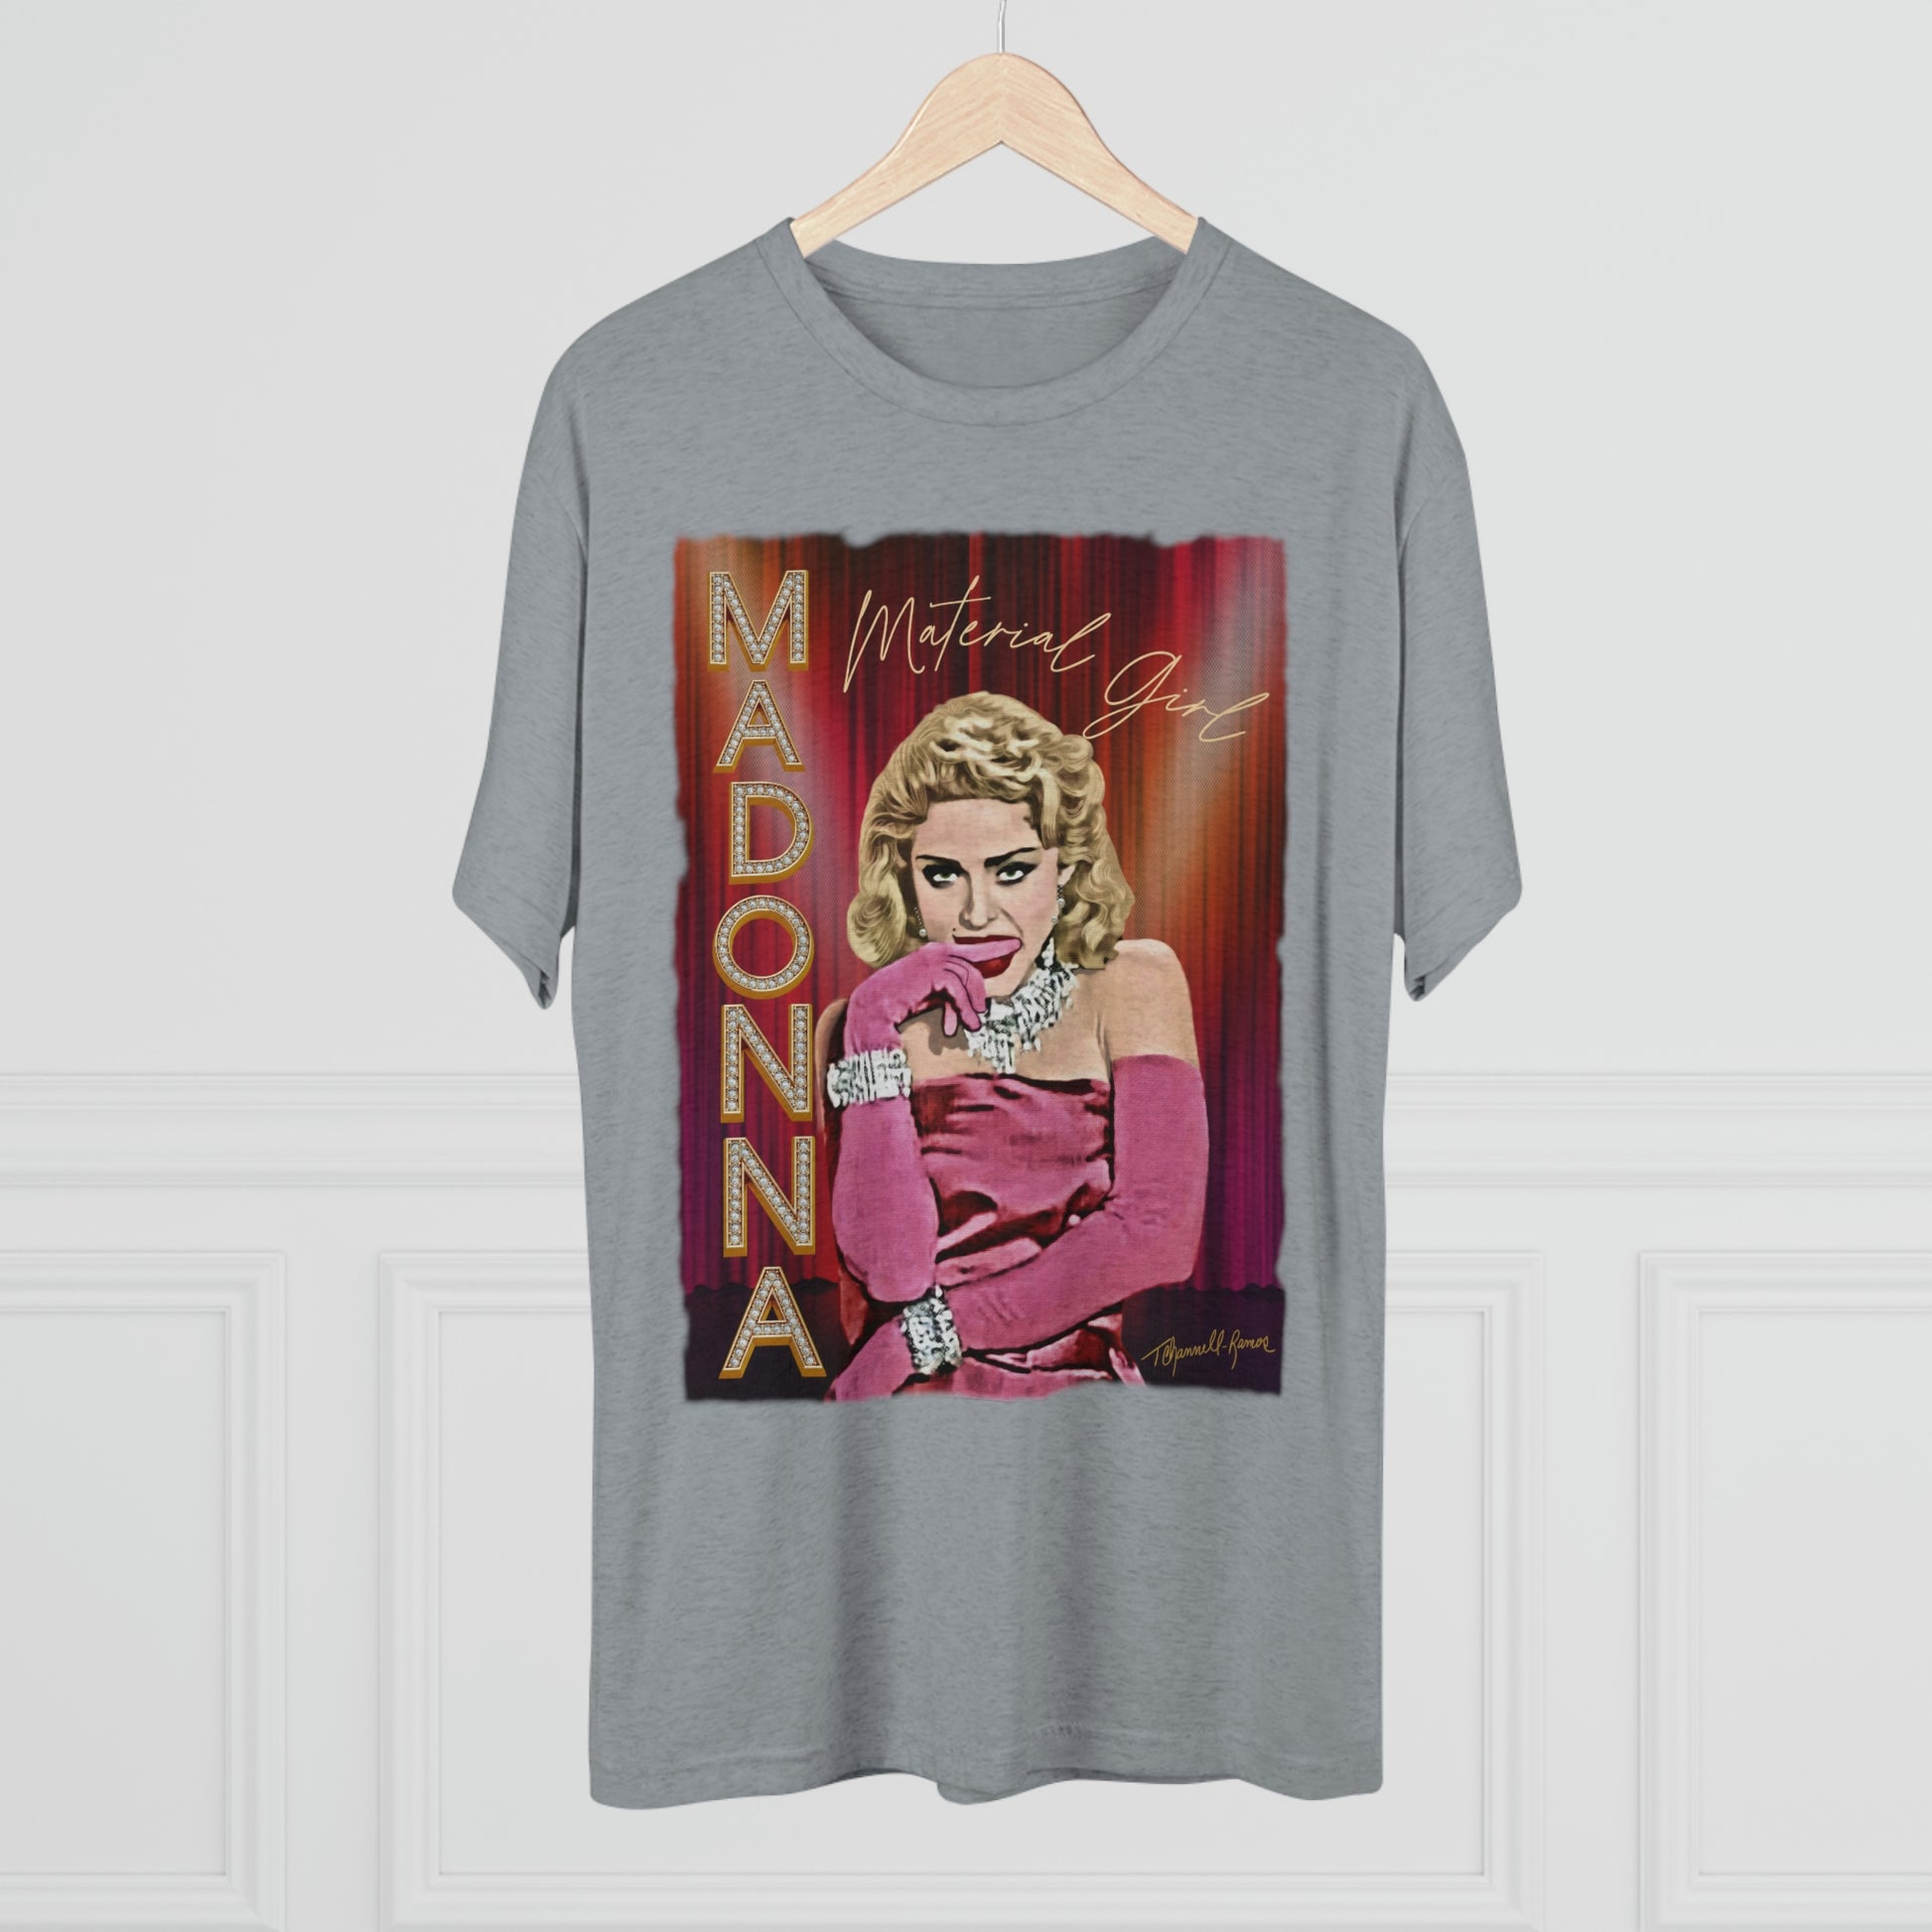 The Material Girl - Madonna - Black and White Edition T-Shirt by